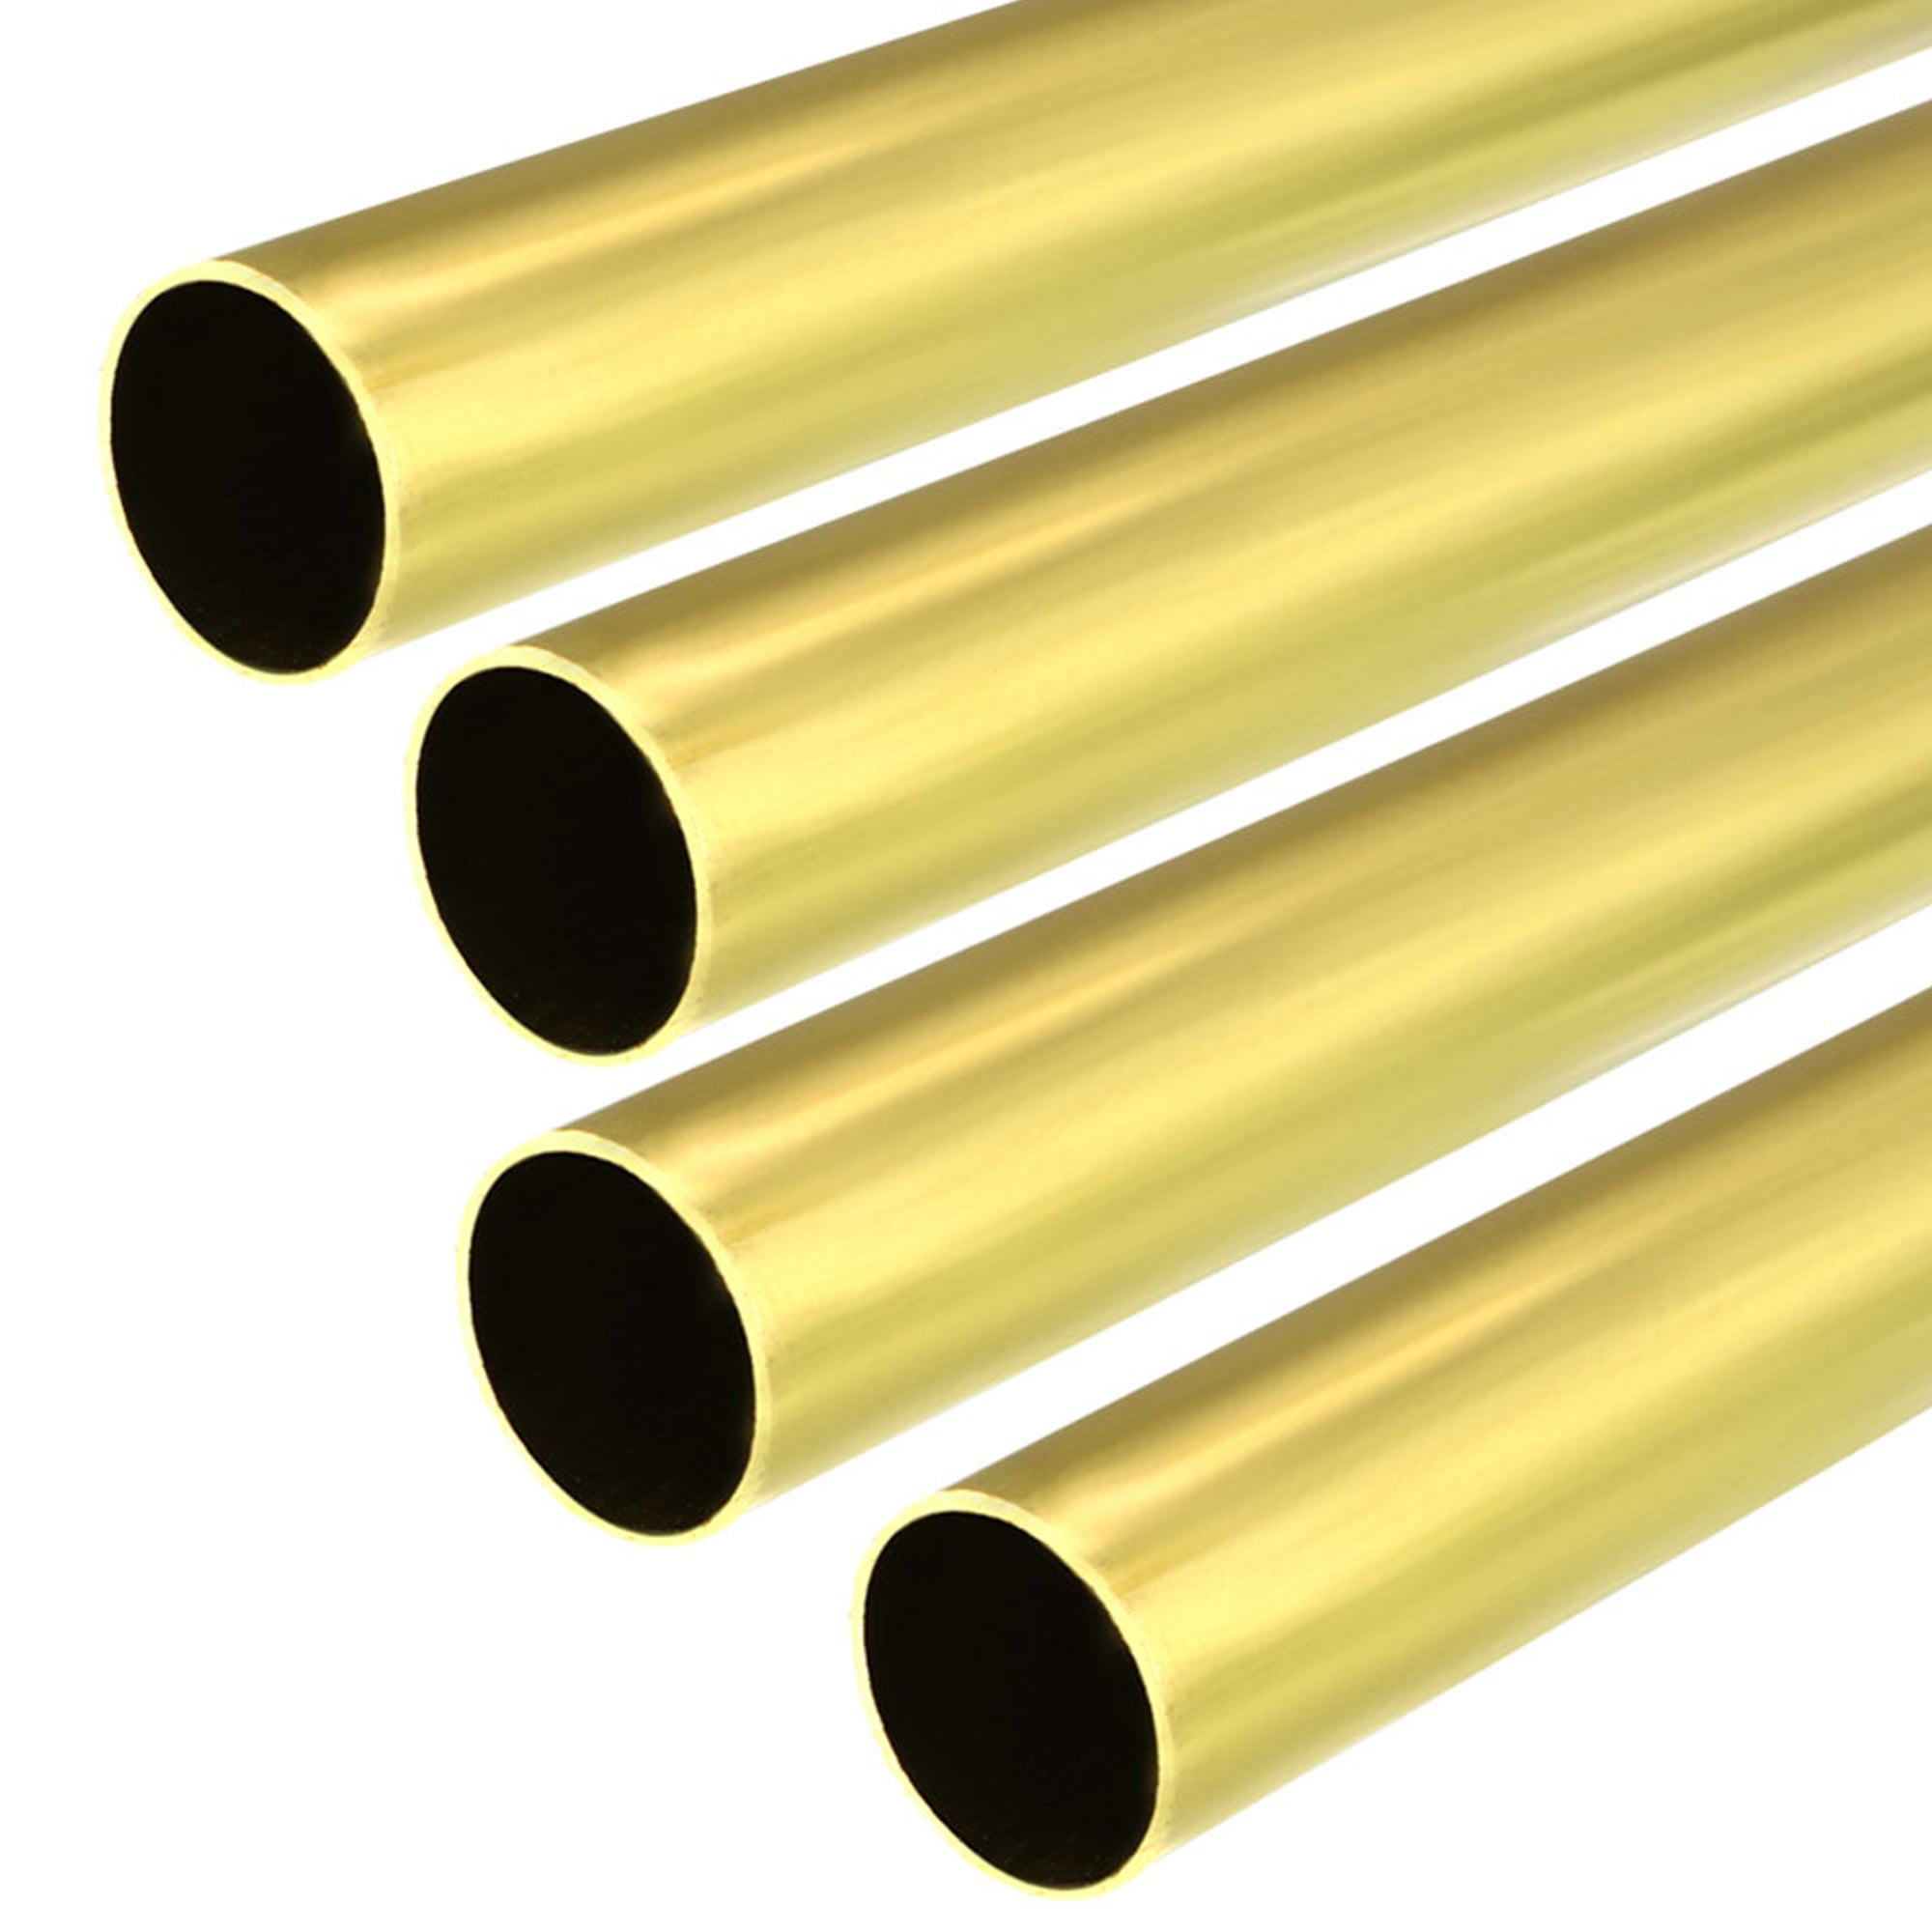 Details about   2PCS 11mm x 12mm x 500mm Brass Pipe Tube Round Bar Rod 